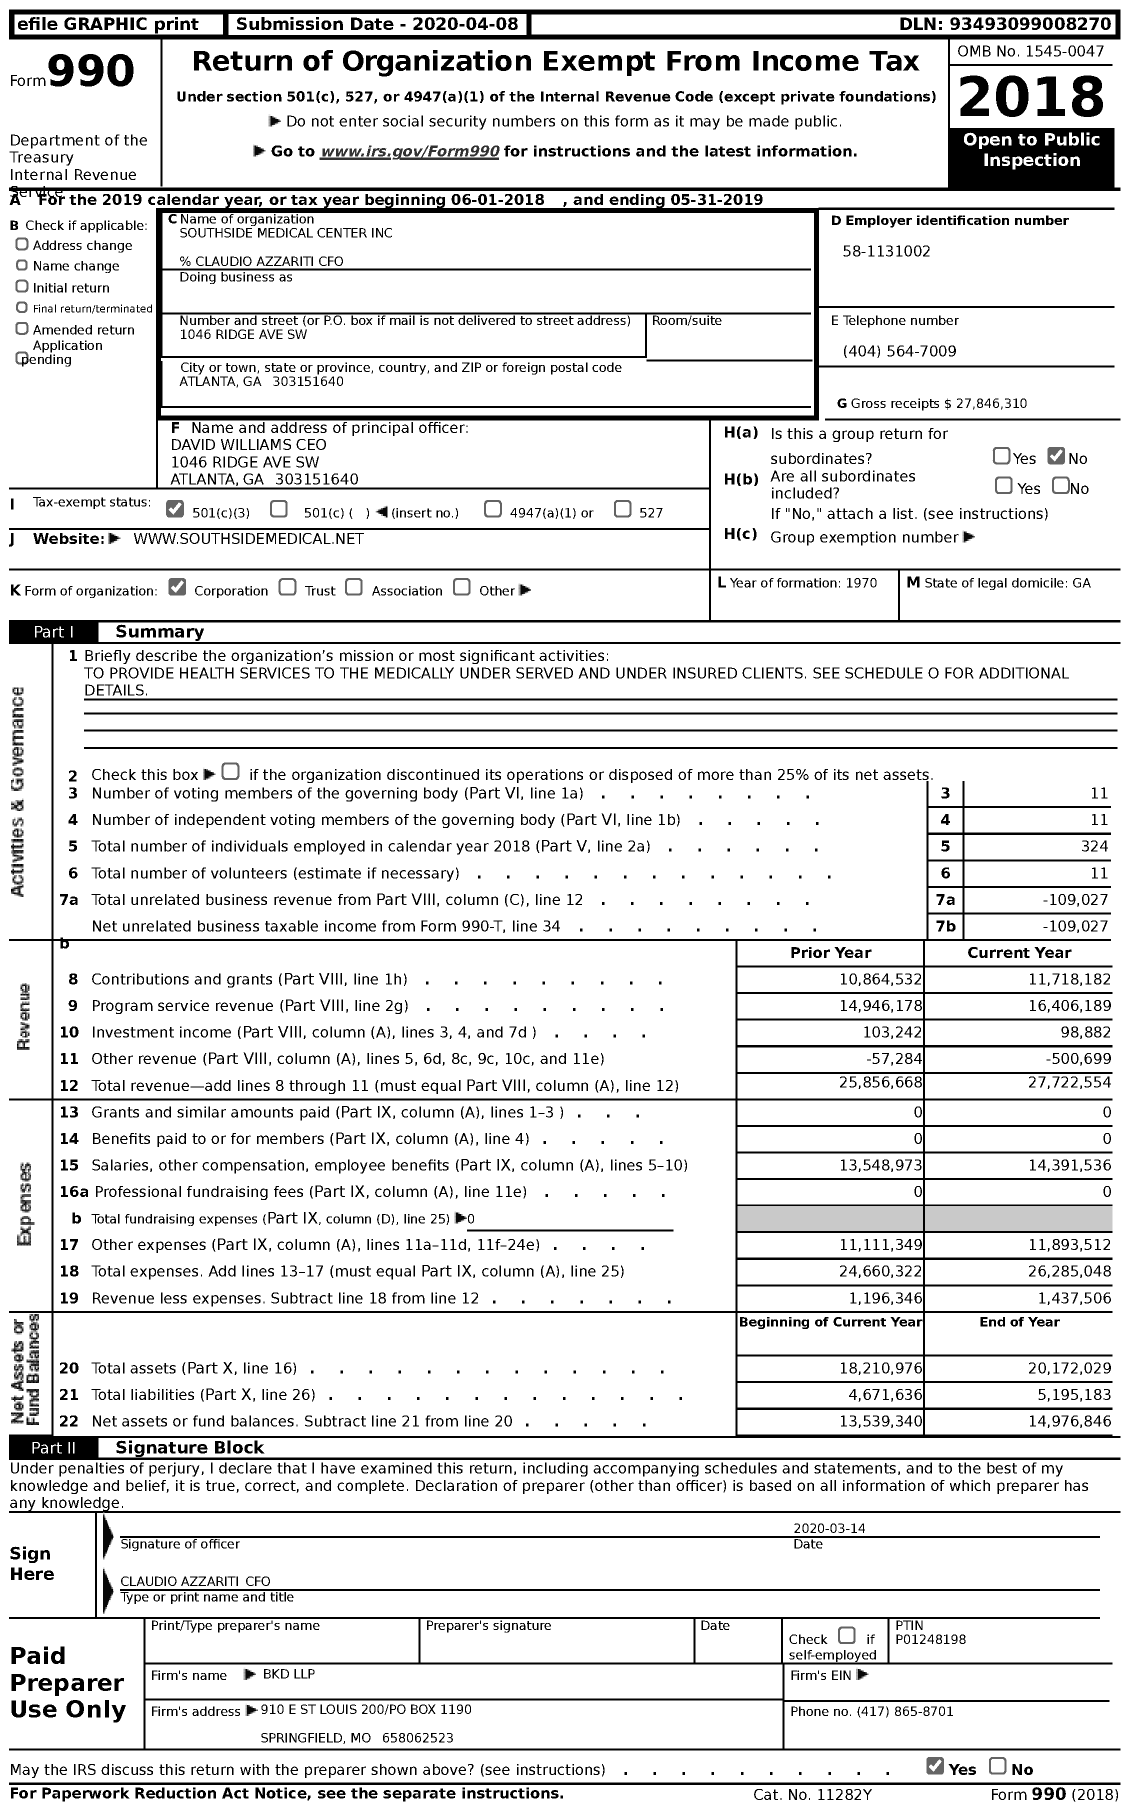 Image of first page of 2018 Form 990 for Southside Medical Center (SMC)